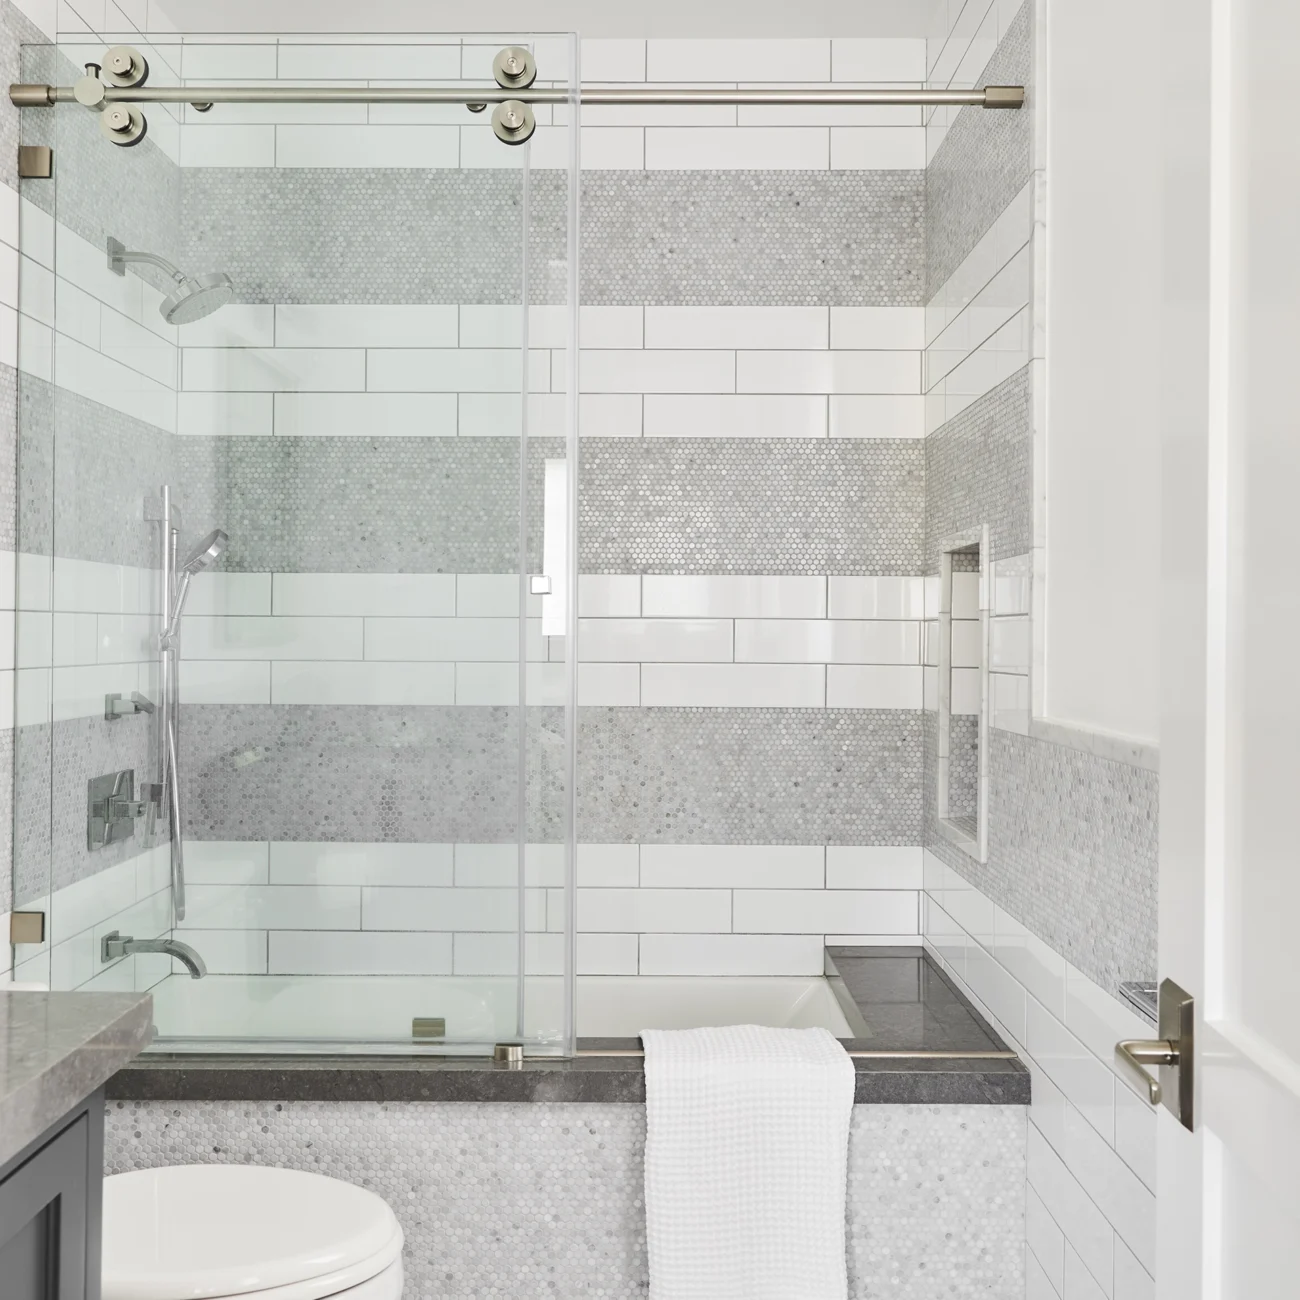 Christine Vroom-Interiors Thayer | Traditional bathroom with grey and white tile in glass shower